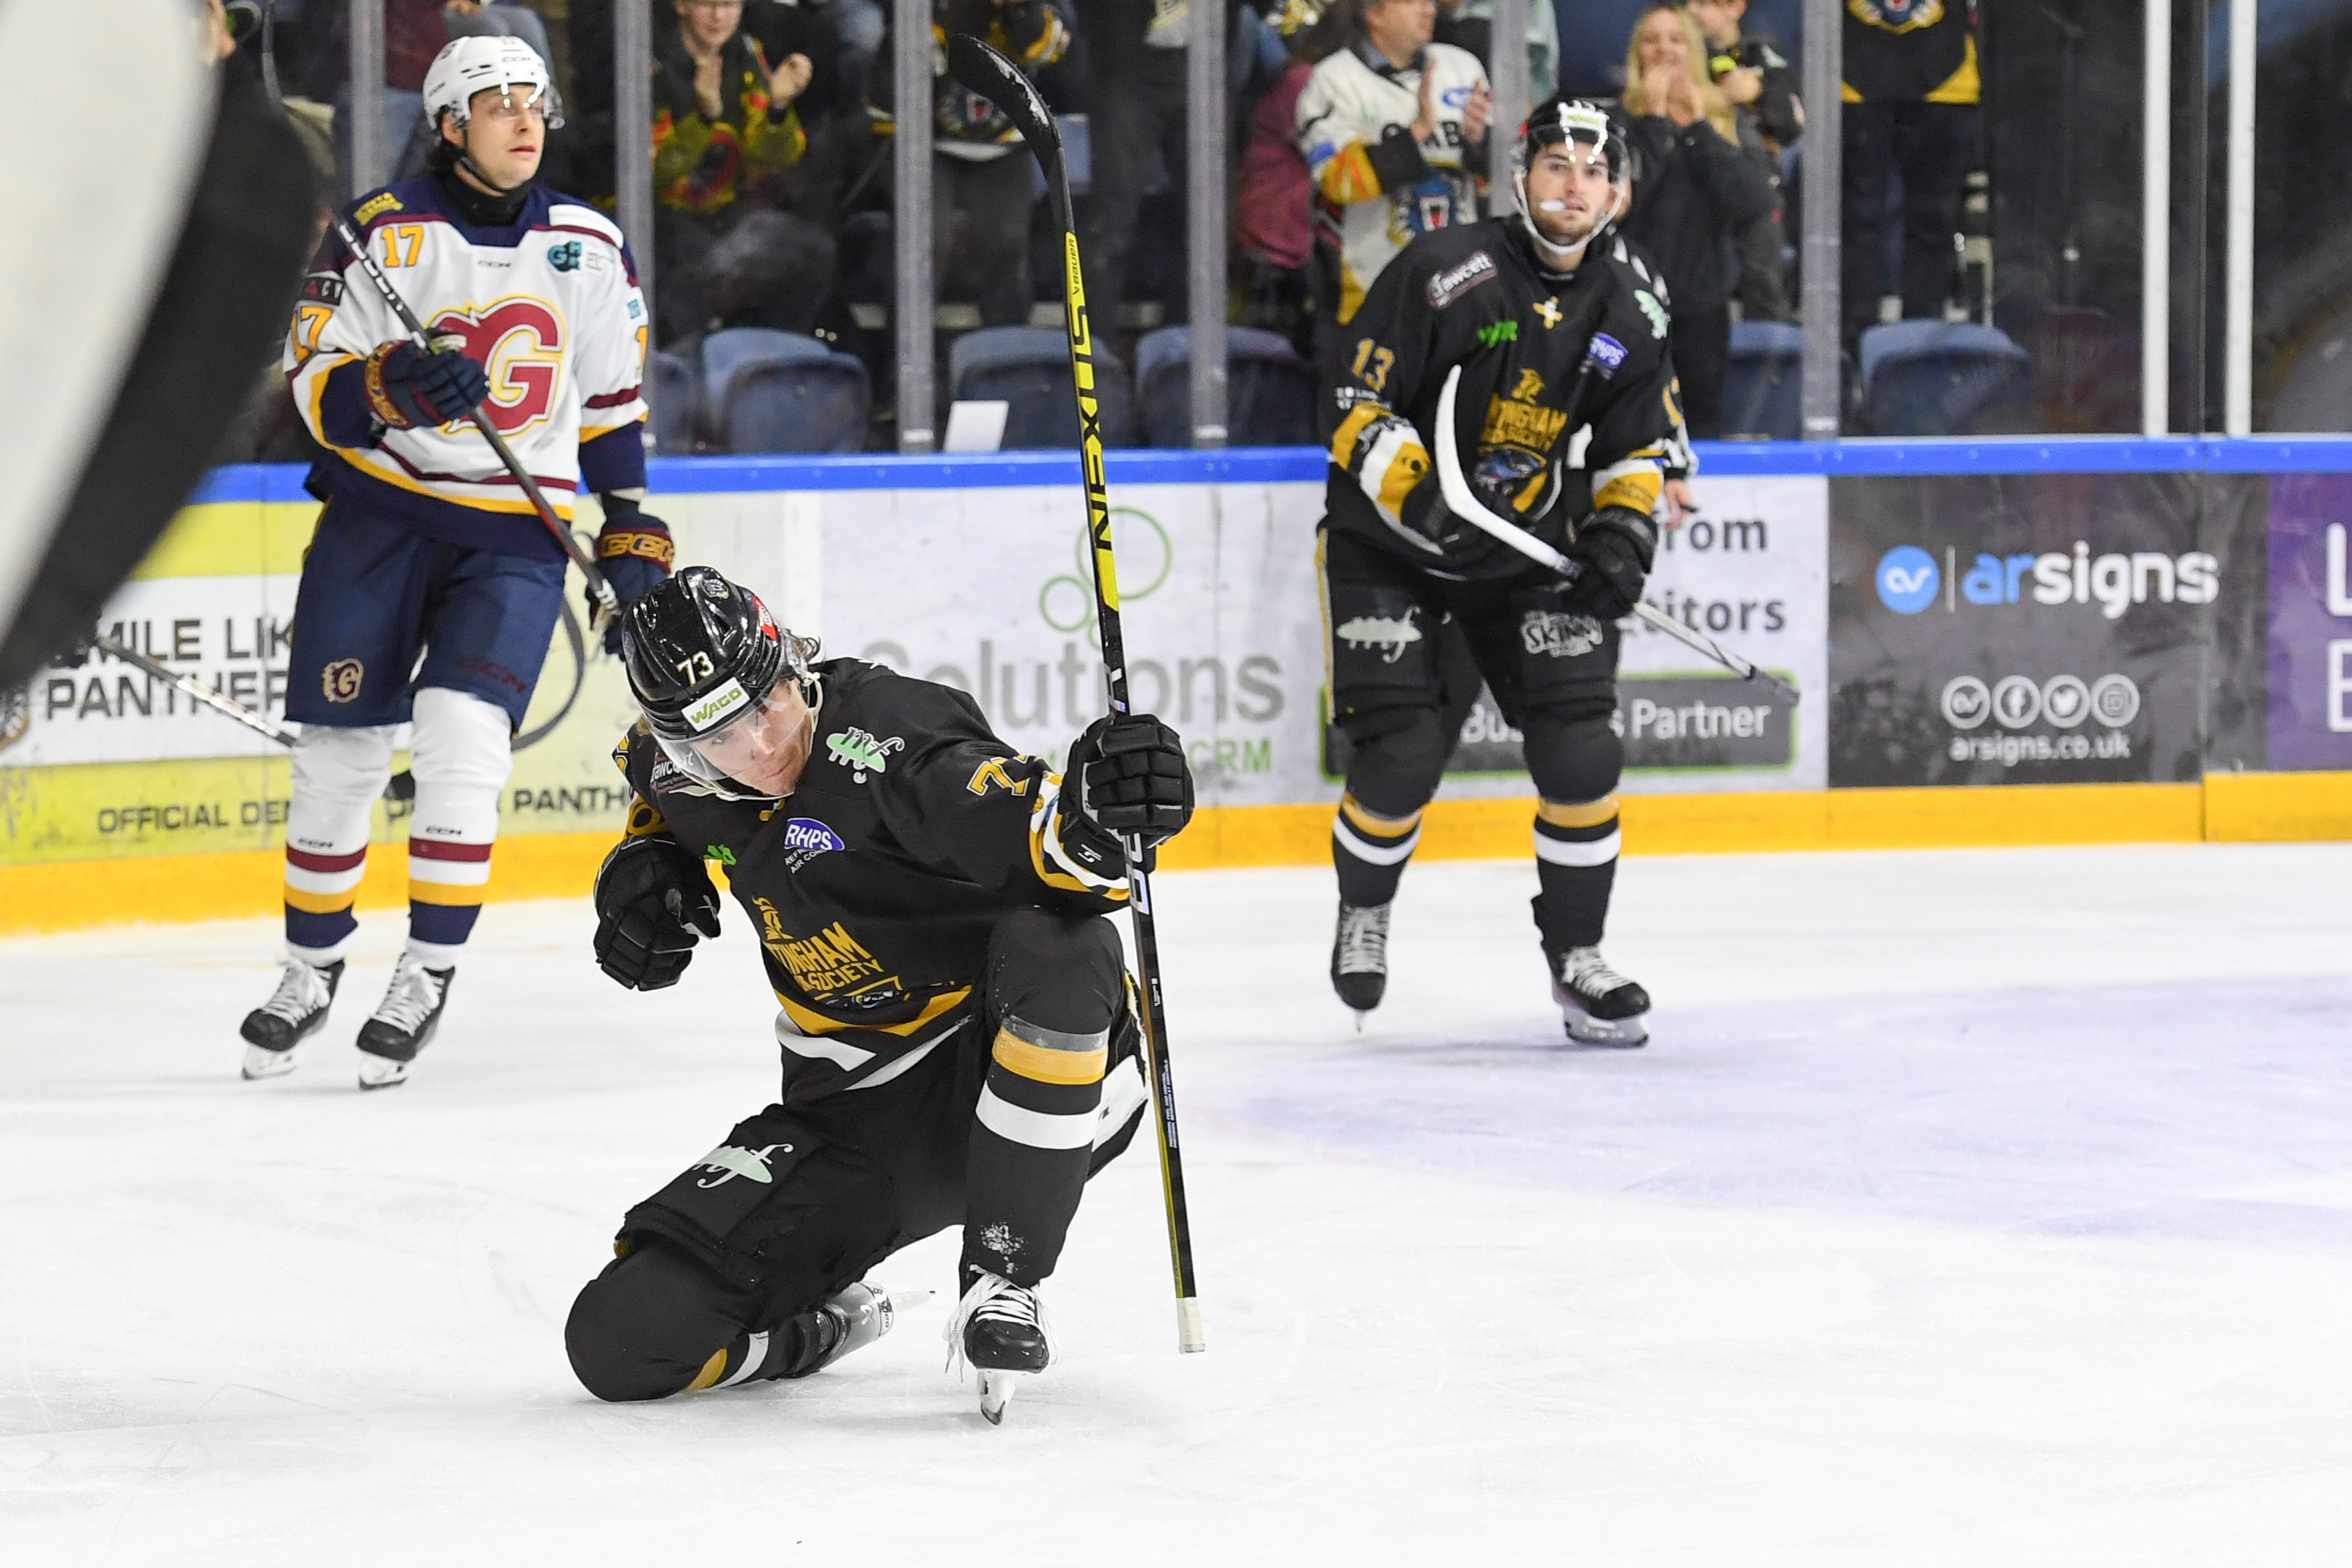 MATCH REPORT: PANTHERS 3-0 FLAMES Top Image